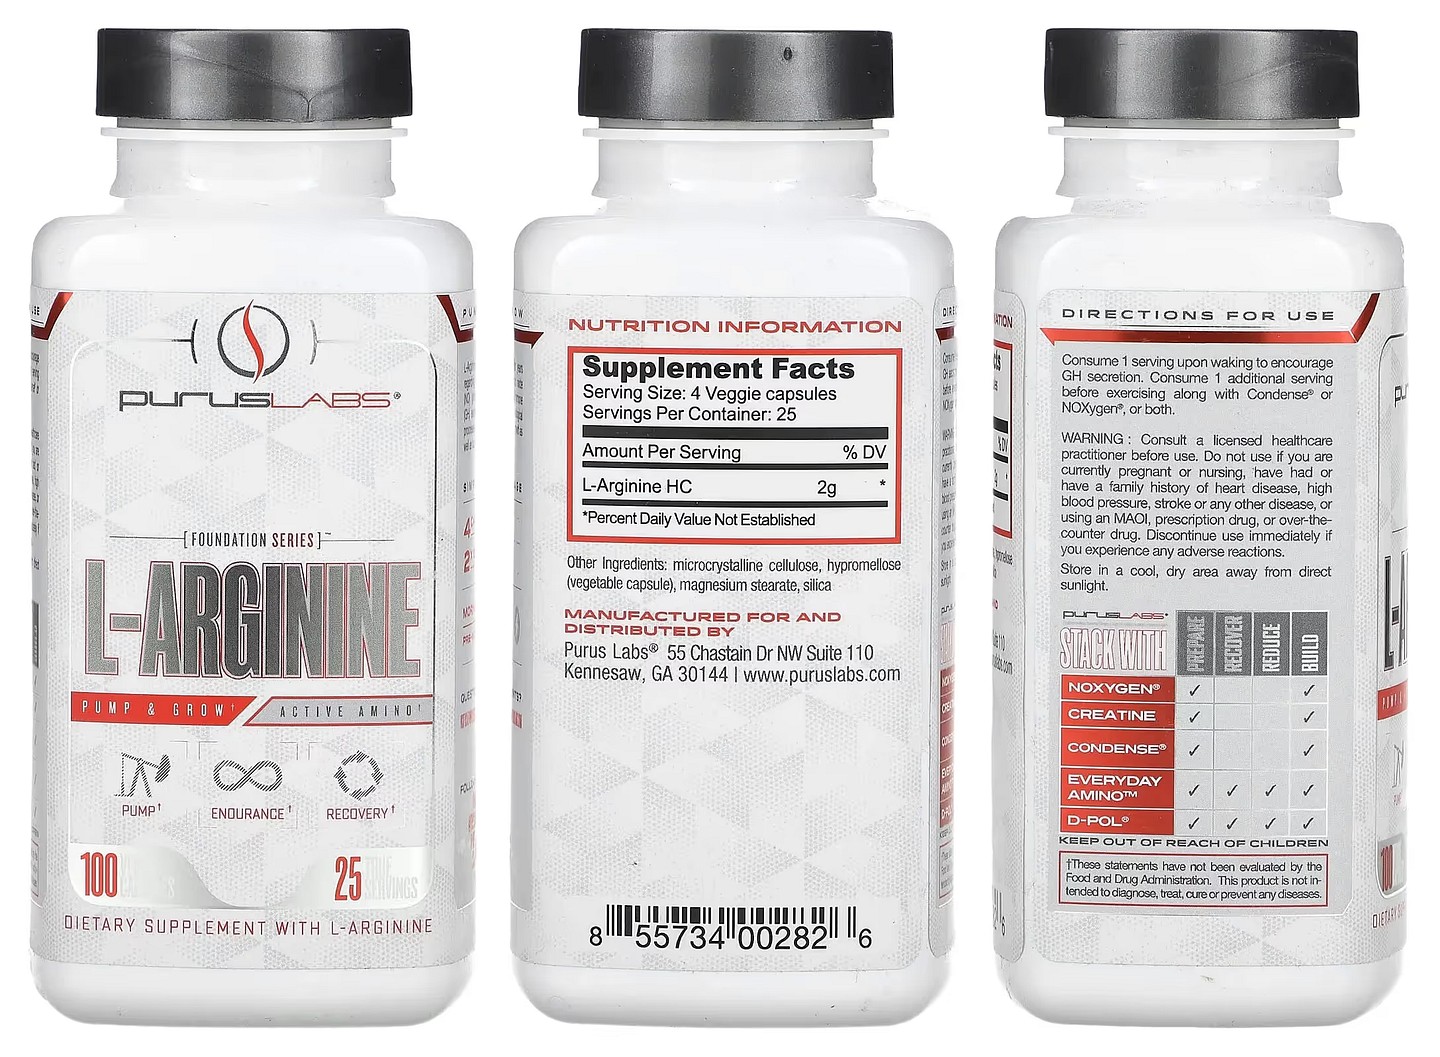 Purus Labs, Foundation Series packaging